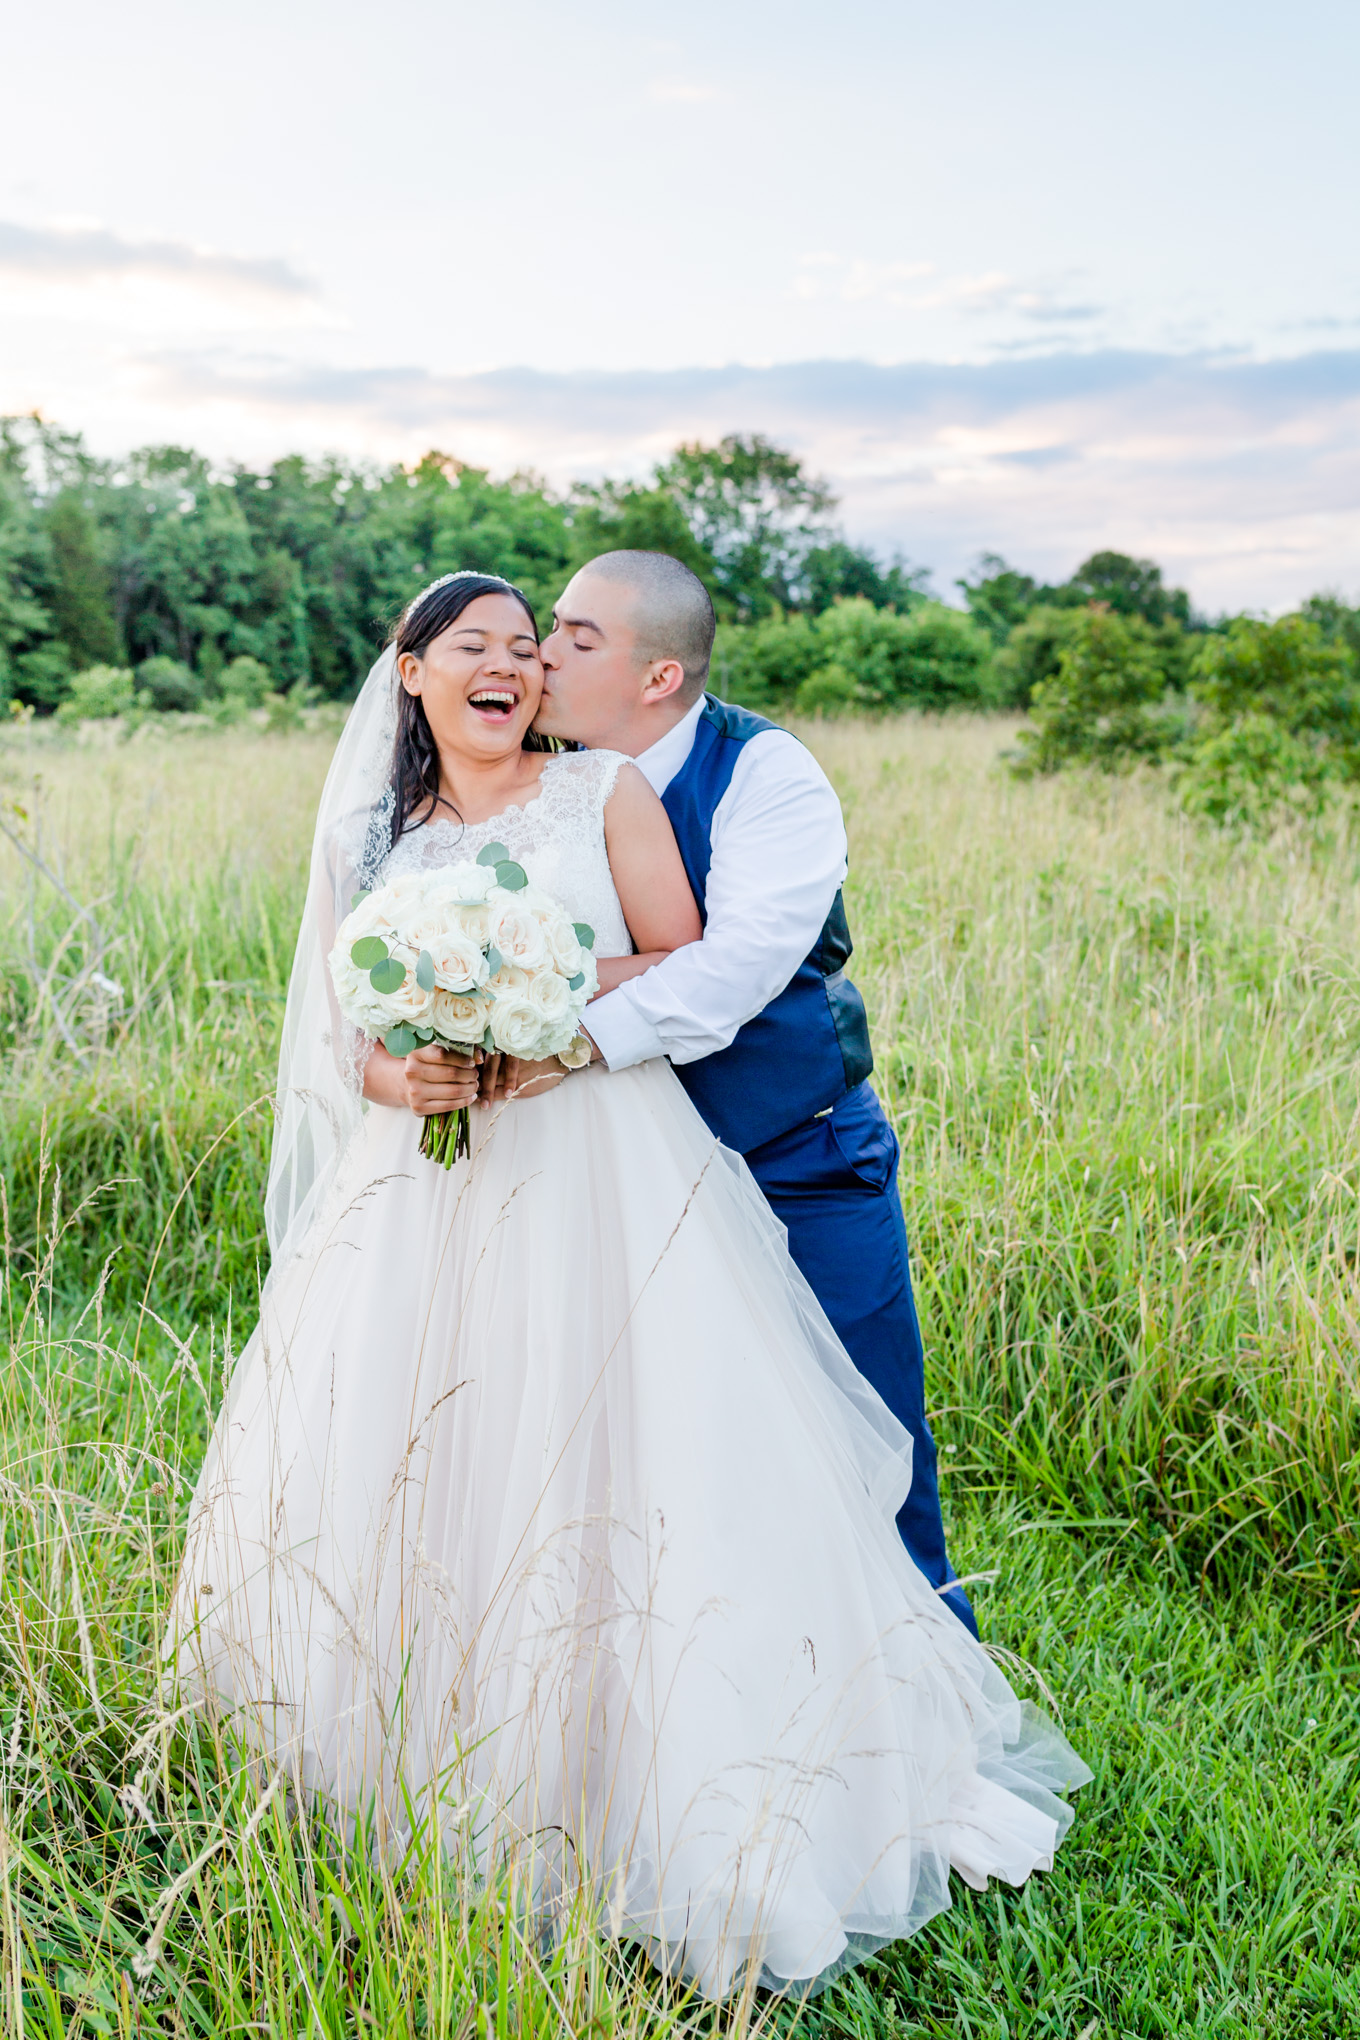 staycation over, staycation, bride and groom, wedding portraits, magic hour, Rust Manor House